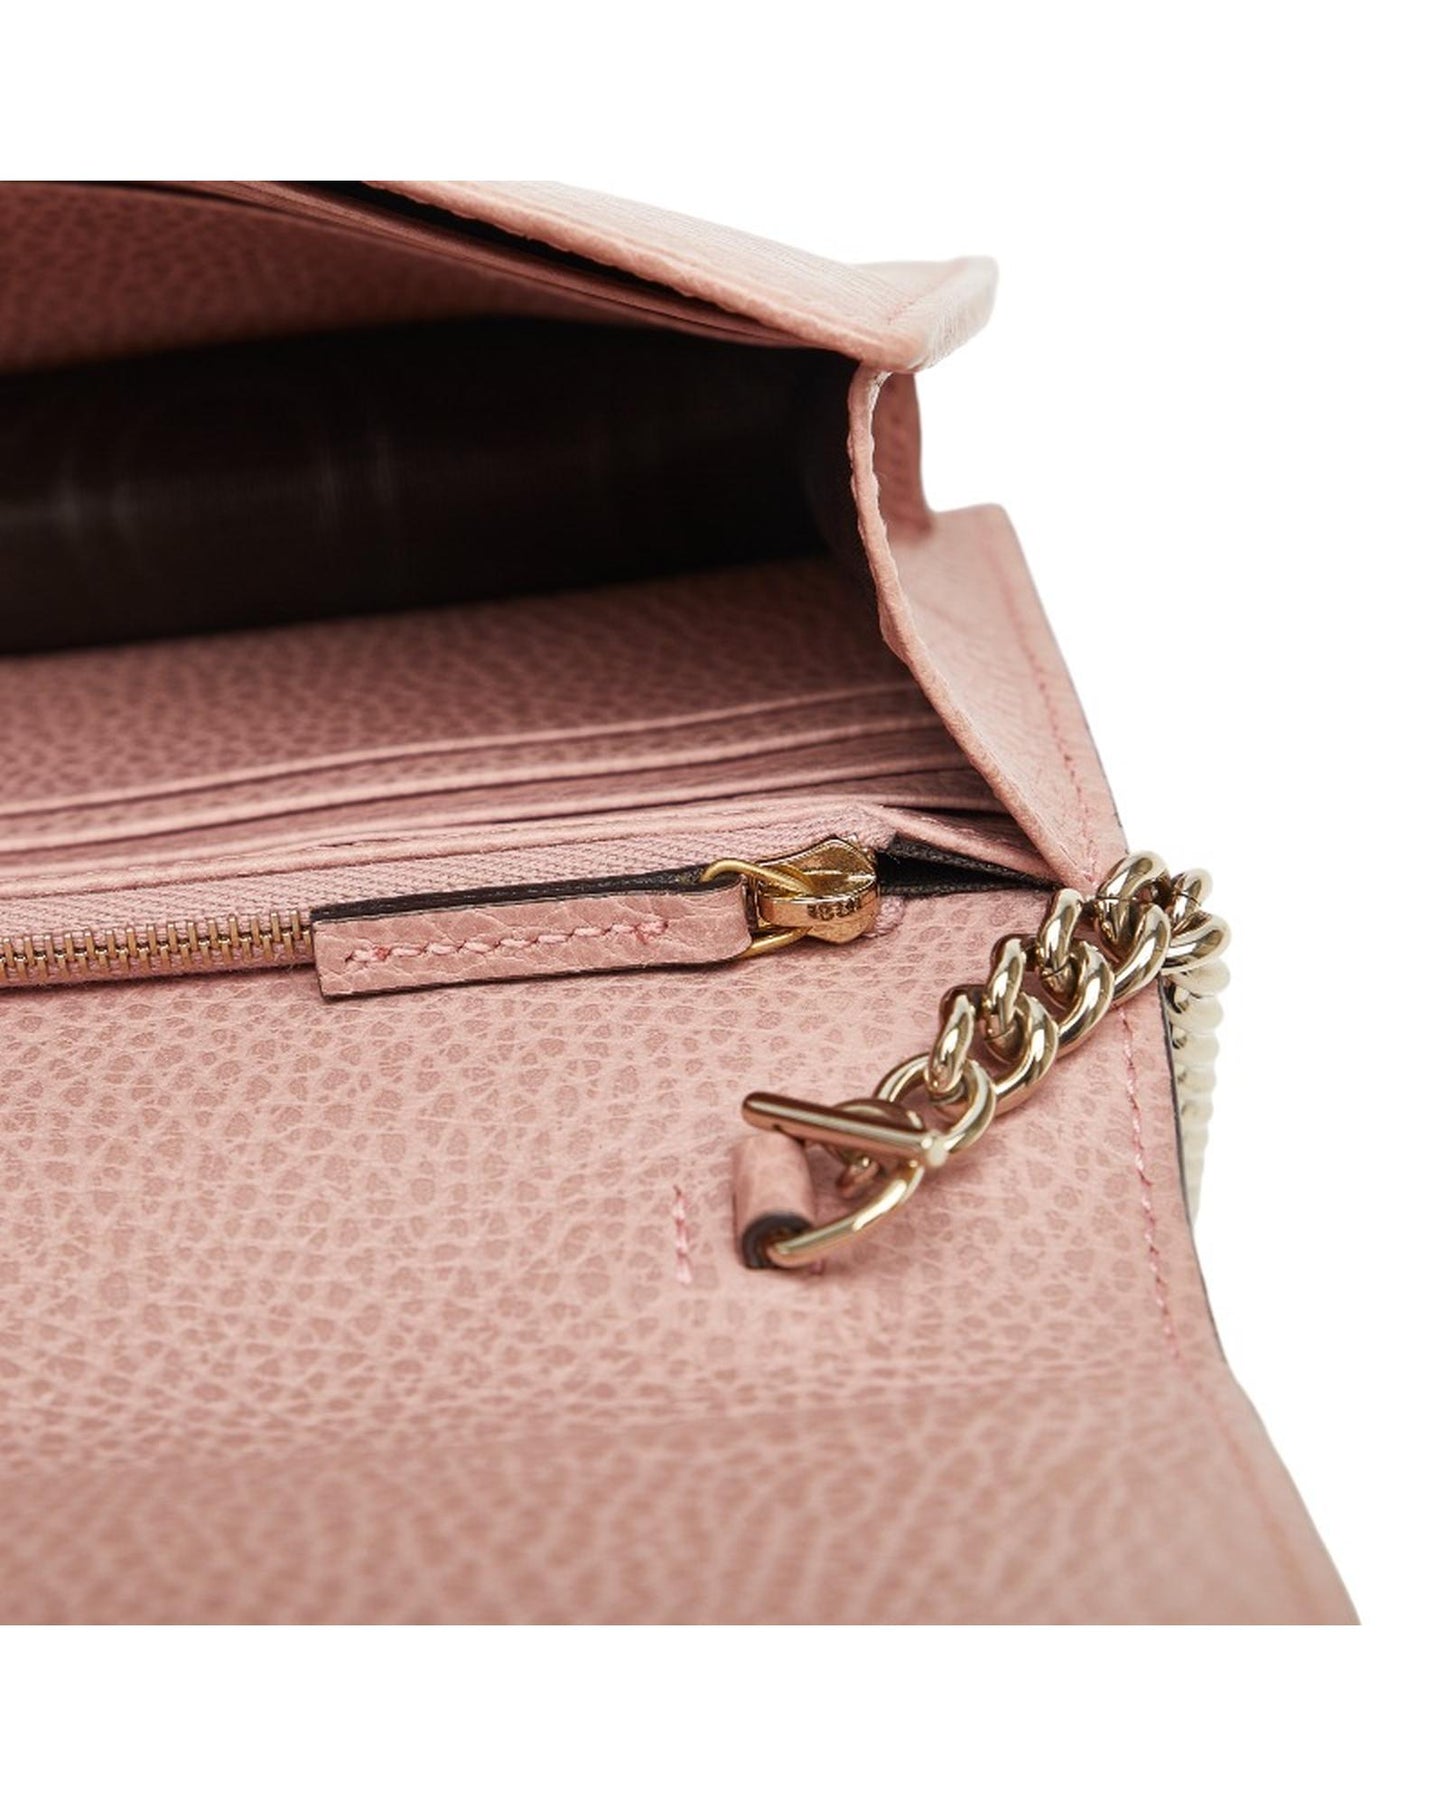 Gucci Women's Interlocking G Leather Wallet On Chain Bag in Pink